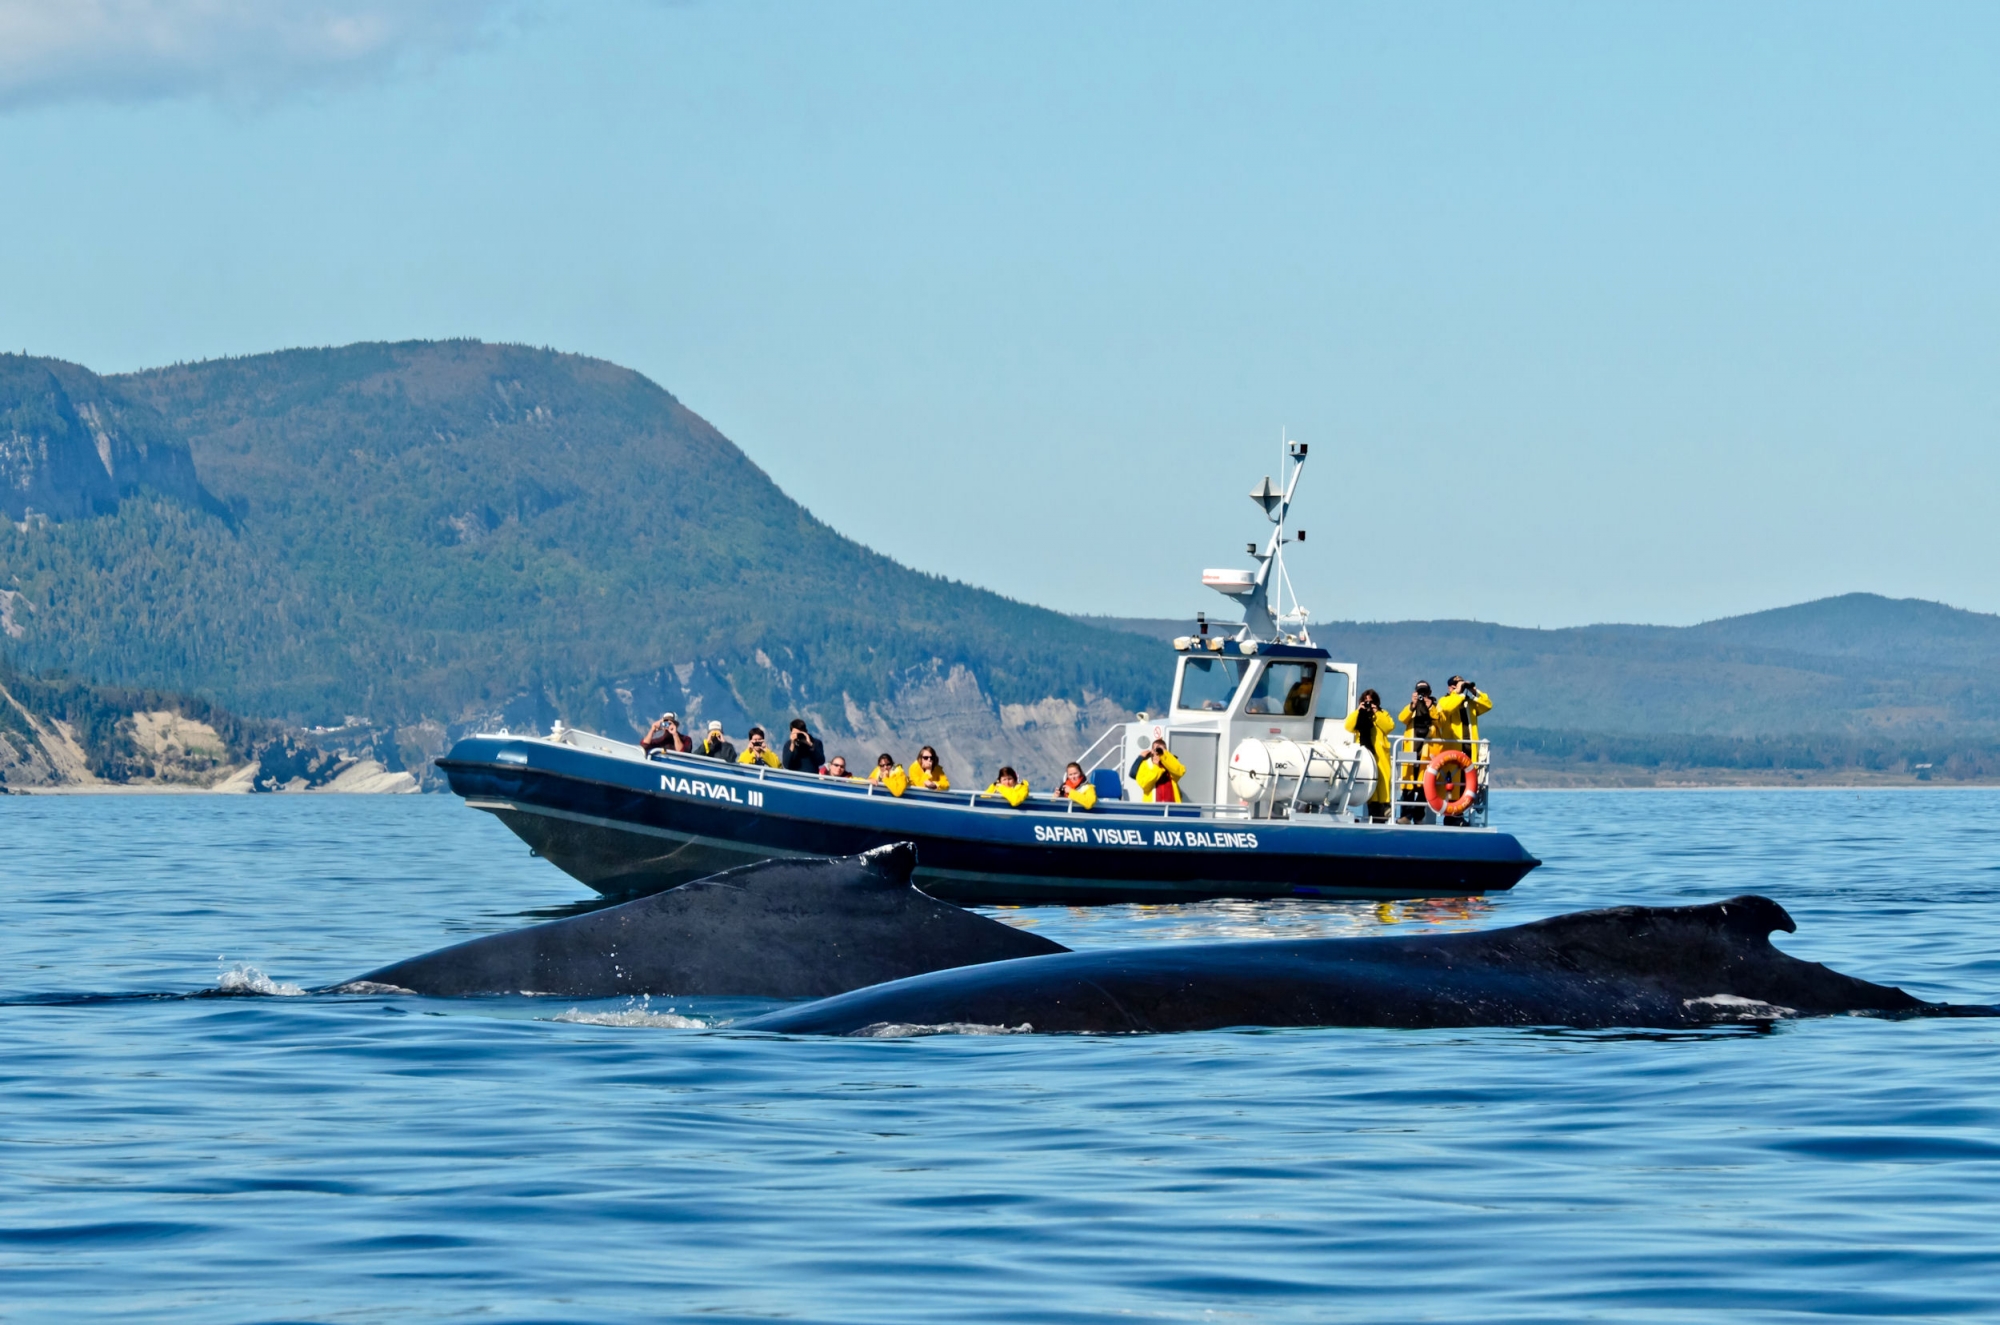 best whale watching tour quebec